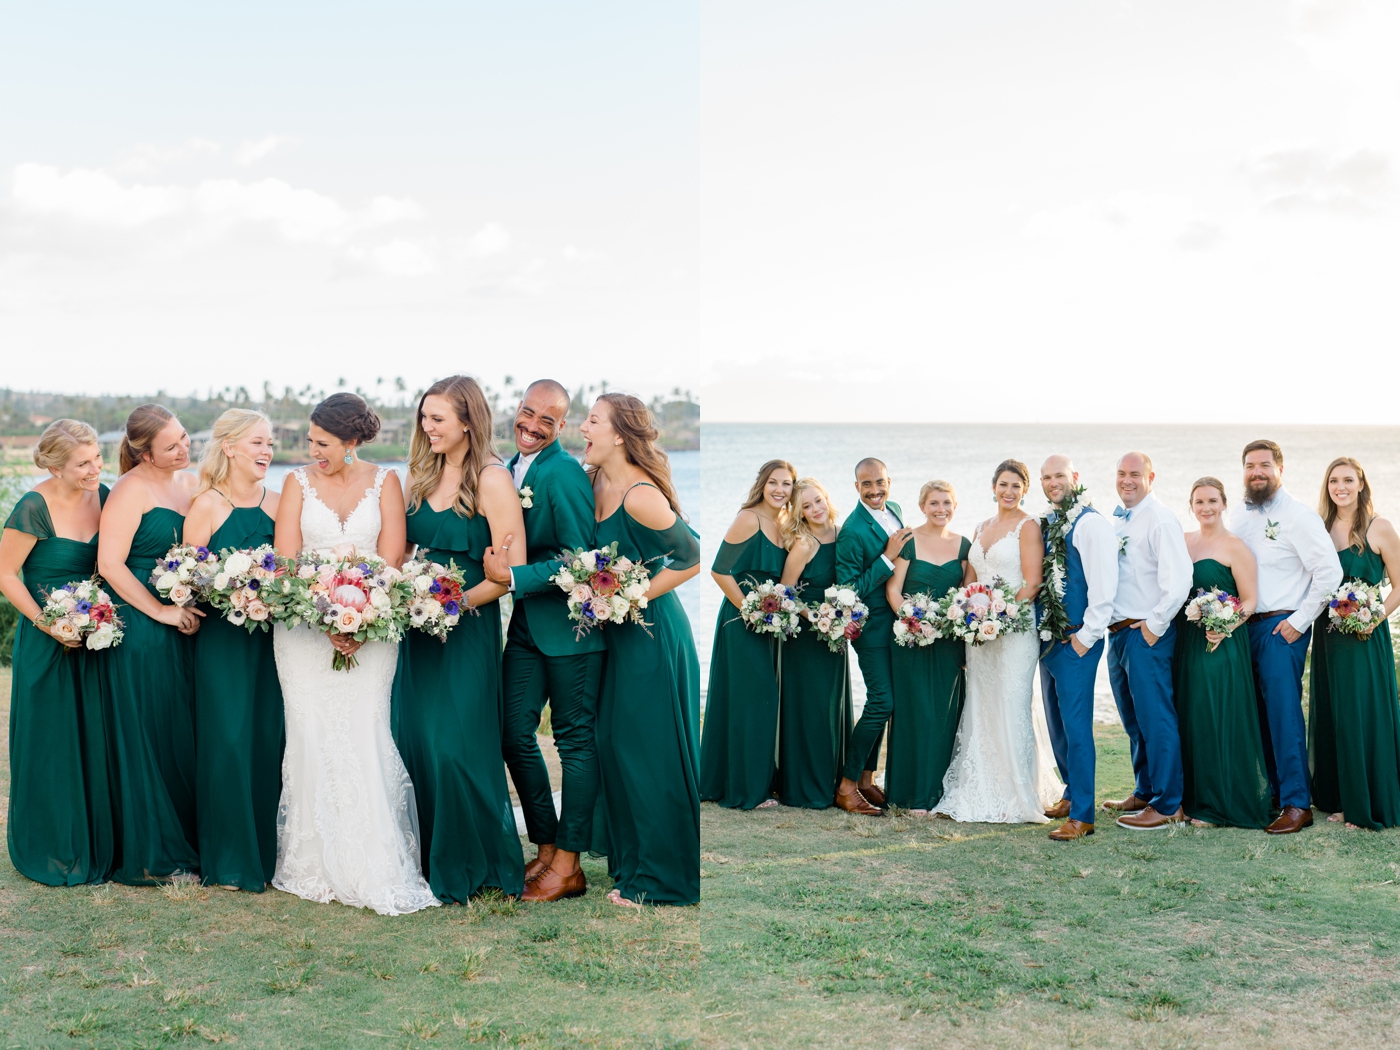 Bridal party in emerald green with colorful bouquets